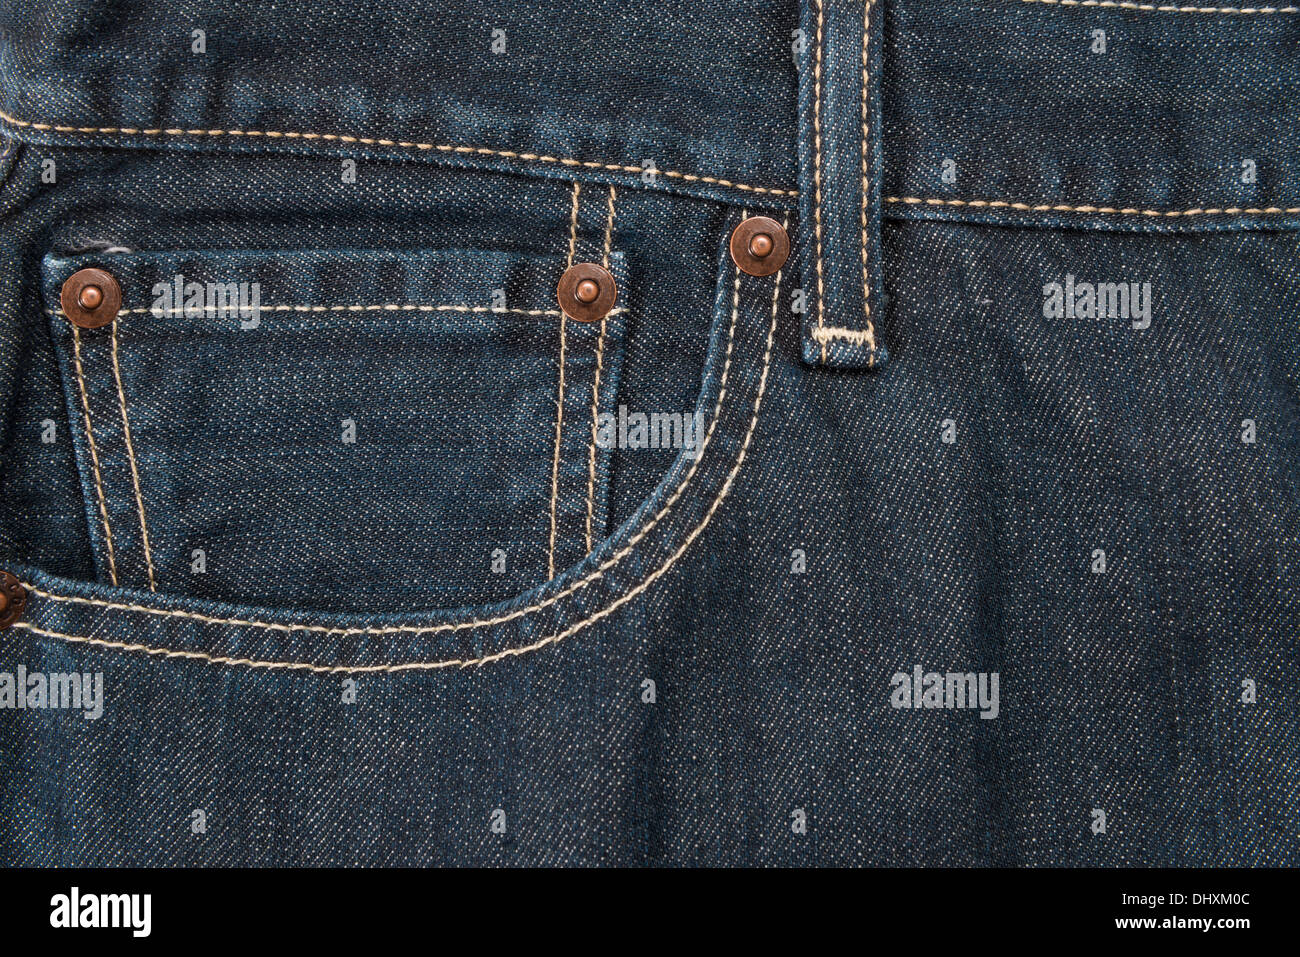 A pocket with rivets and a waistband used as a background Stock Photo